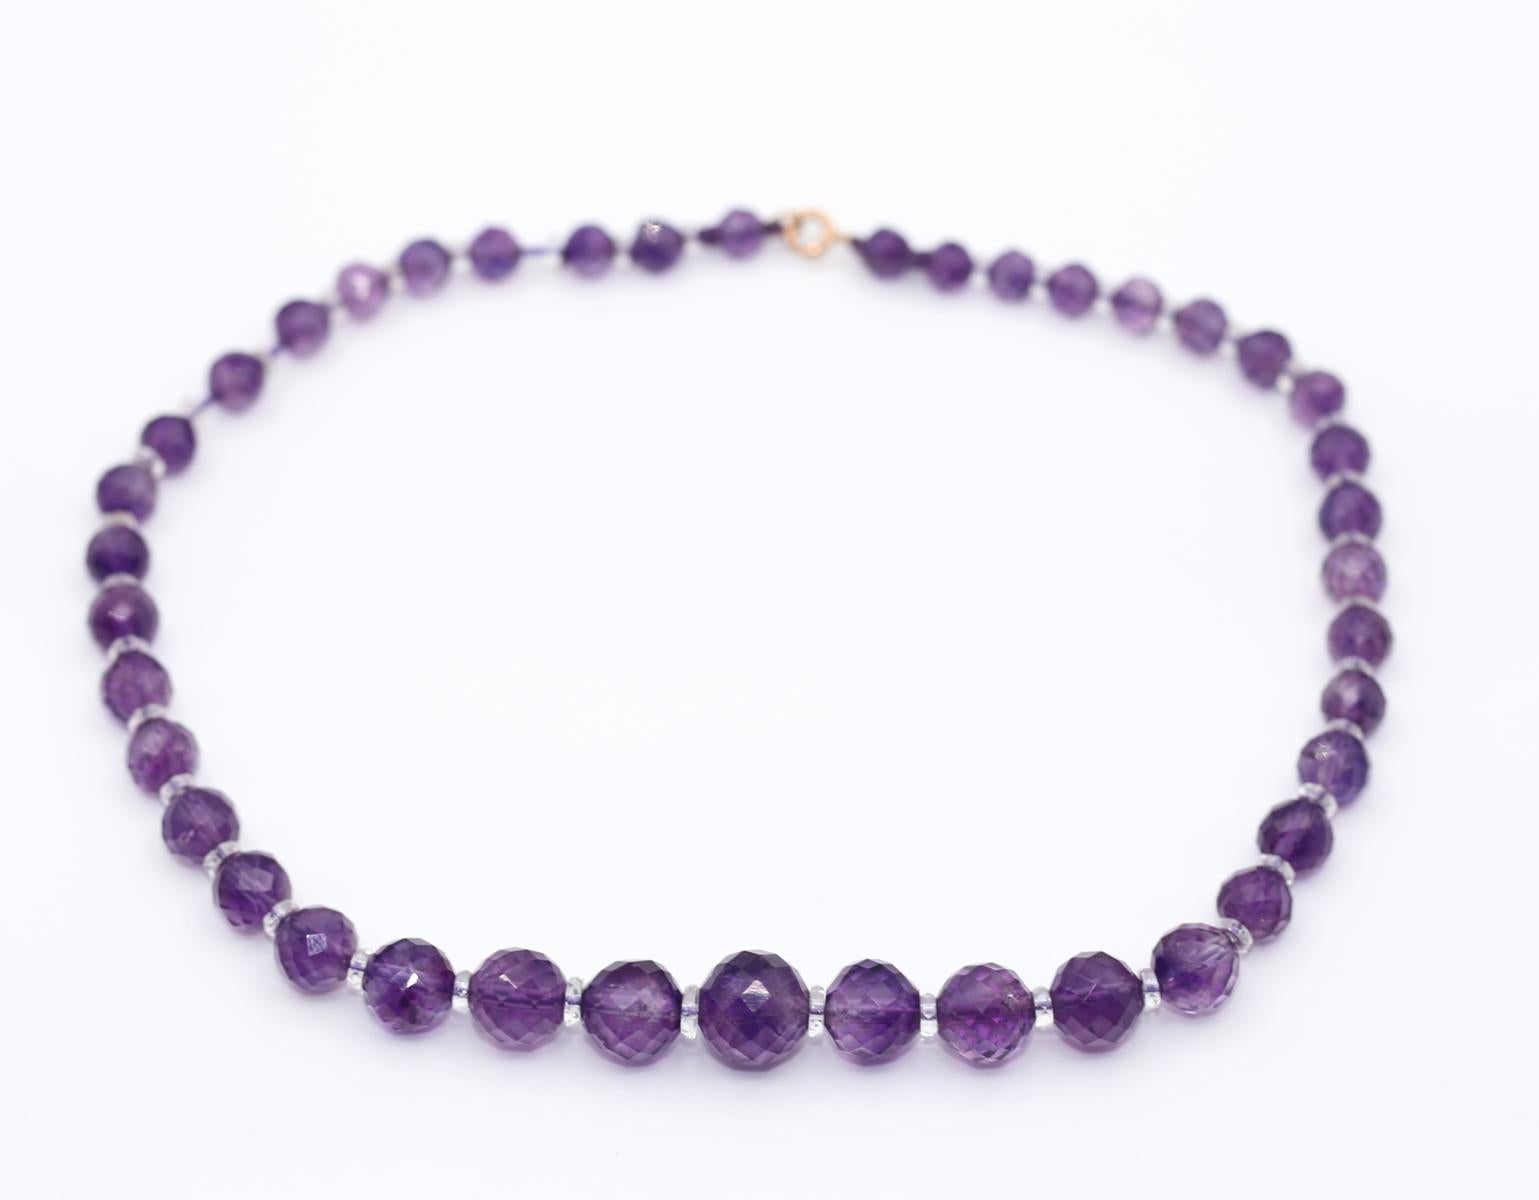 Bead Amethyst Rock Crystal Necklace, 1960 For Sale